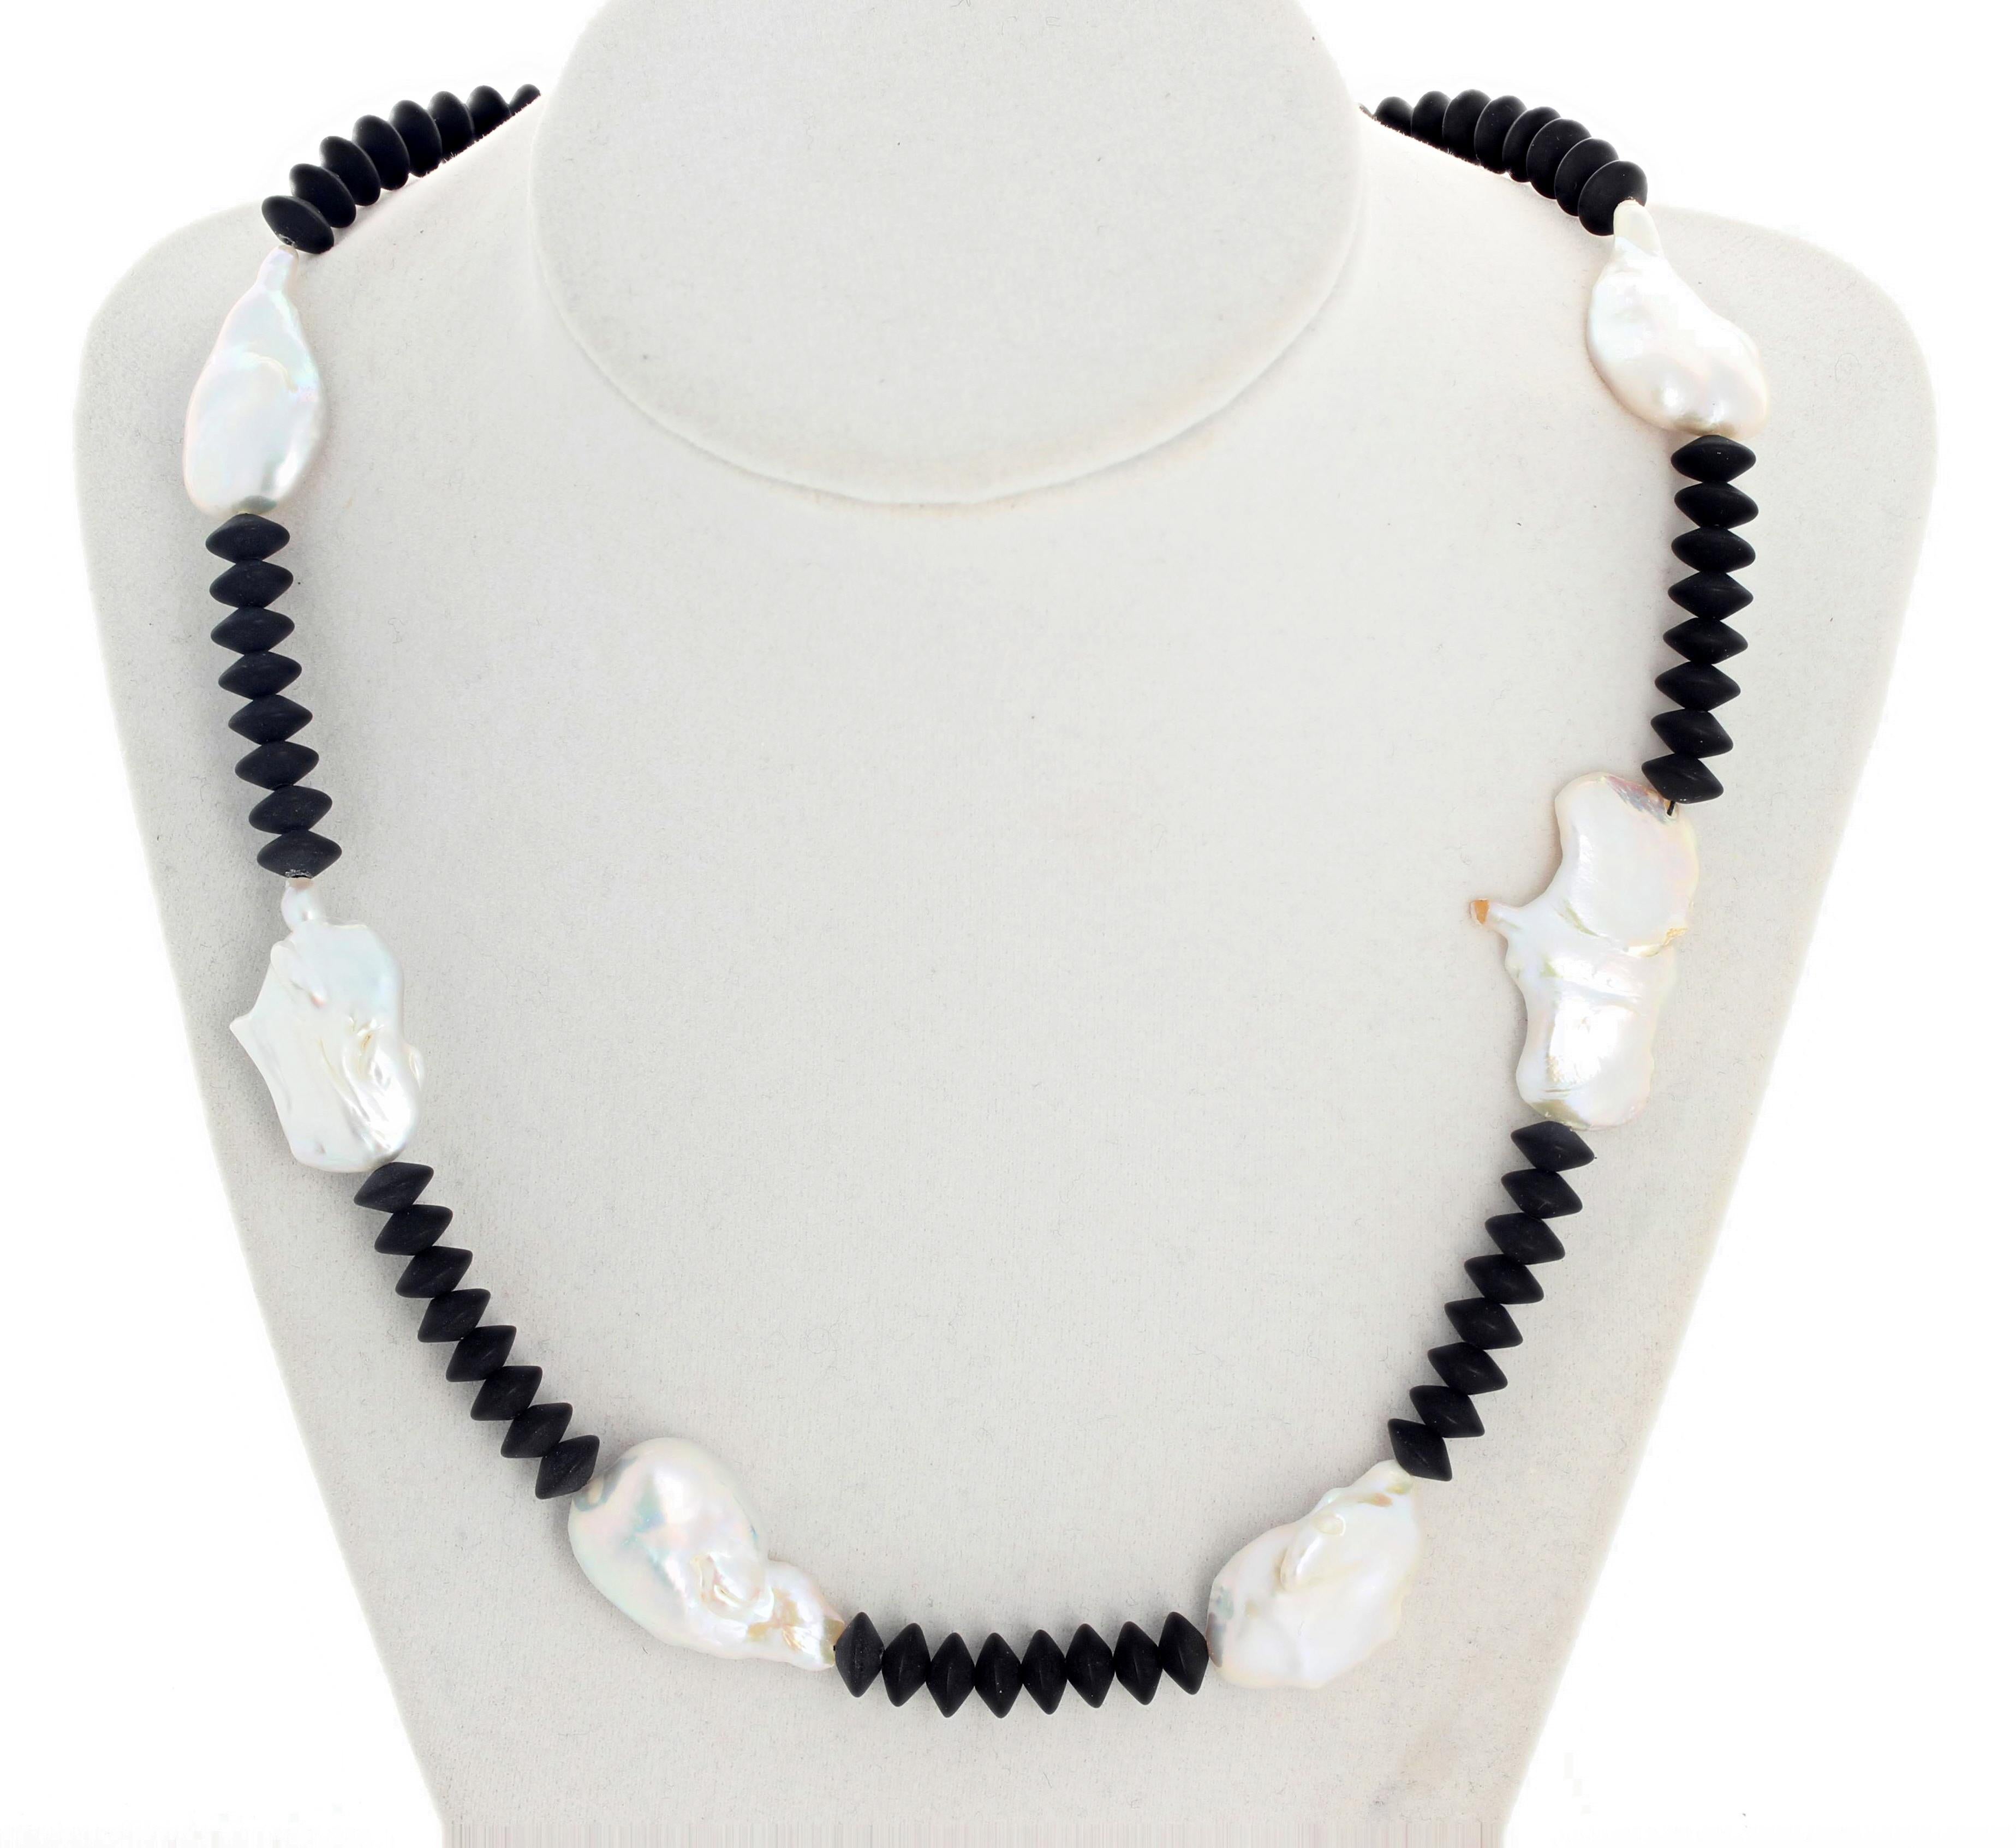 20 inch long super-elegant unique black Onyx rondels and natural Cultured Pearls necklace with a matching easy to use silver plated pearl hook clasp.   If you wish faster delivery on your purchase choose UPS to ship for you.  